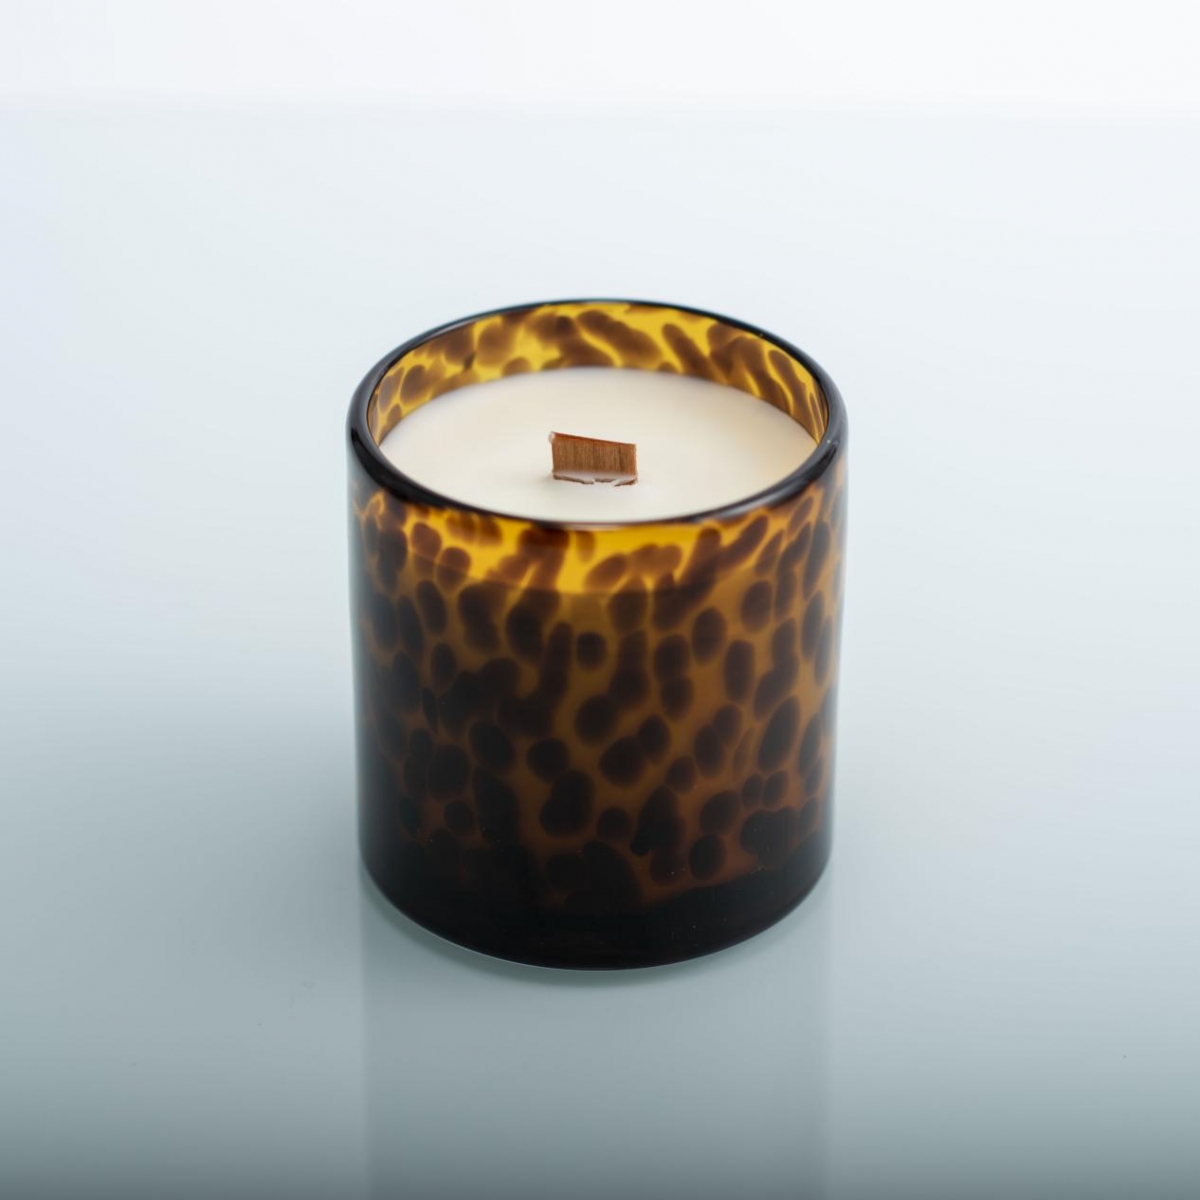 Best Luxury Scented Candles ：Beeswax Candles ,Burberry Brit Man , Perfume Candles ,Tortoise Shell Glaze Scented Candles ,Wooden Wick Candles ,China Factory , Price-HOWCANDLE-Candles,Scented Candles,Aromatherapy Candles,Soy Candles,Vegan Candles,Jar Candles,Pillar Candles,Candle Gift Sets,Essential Oils,Reed Diffuser,Candle Holder,